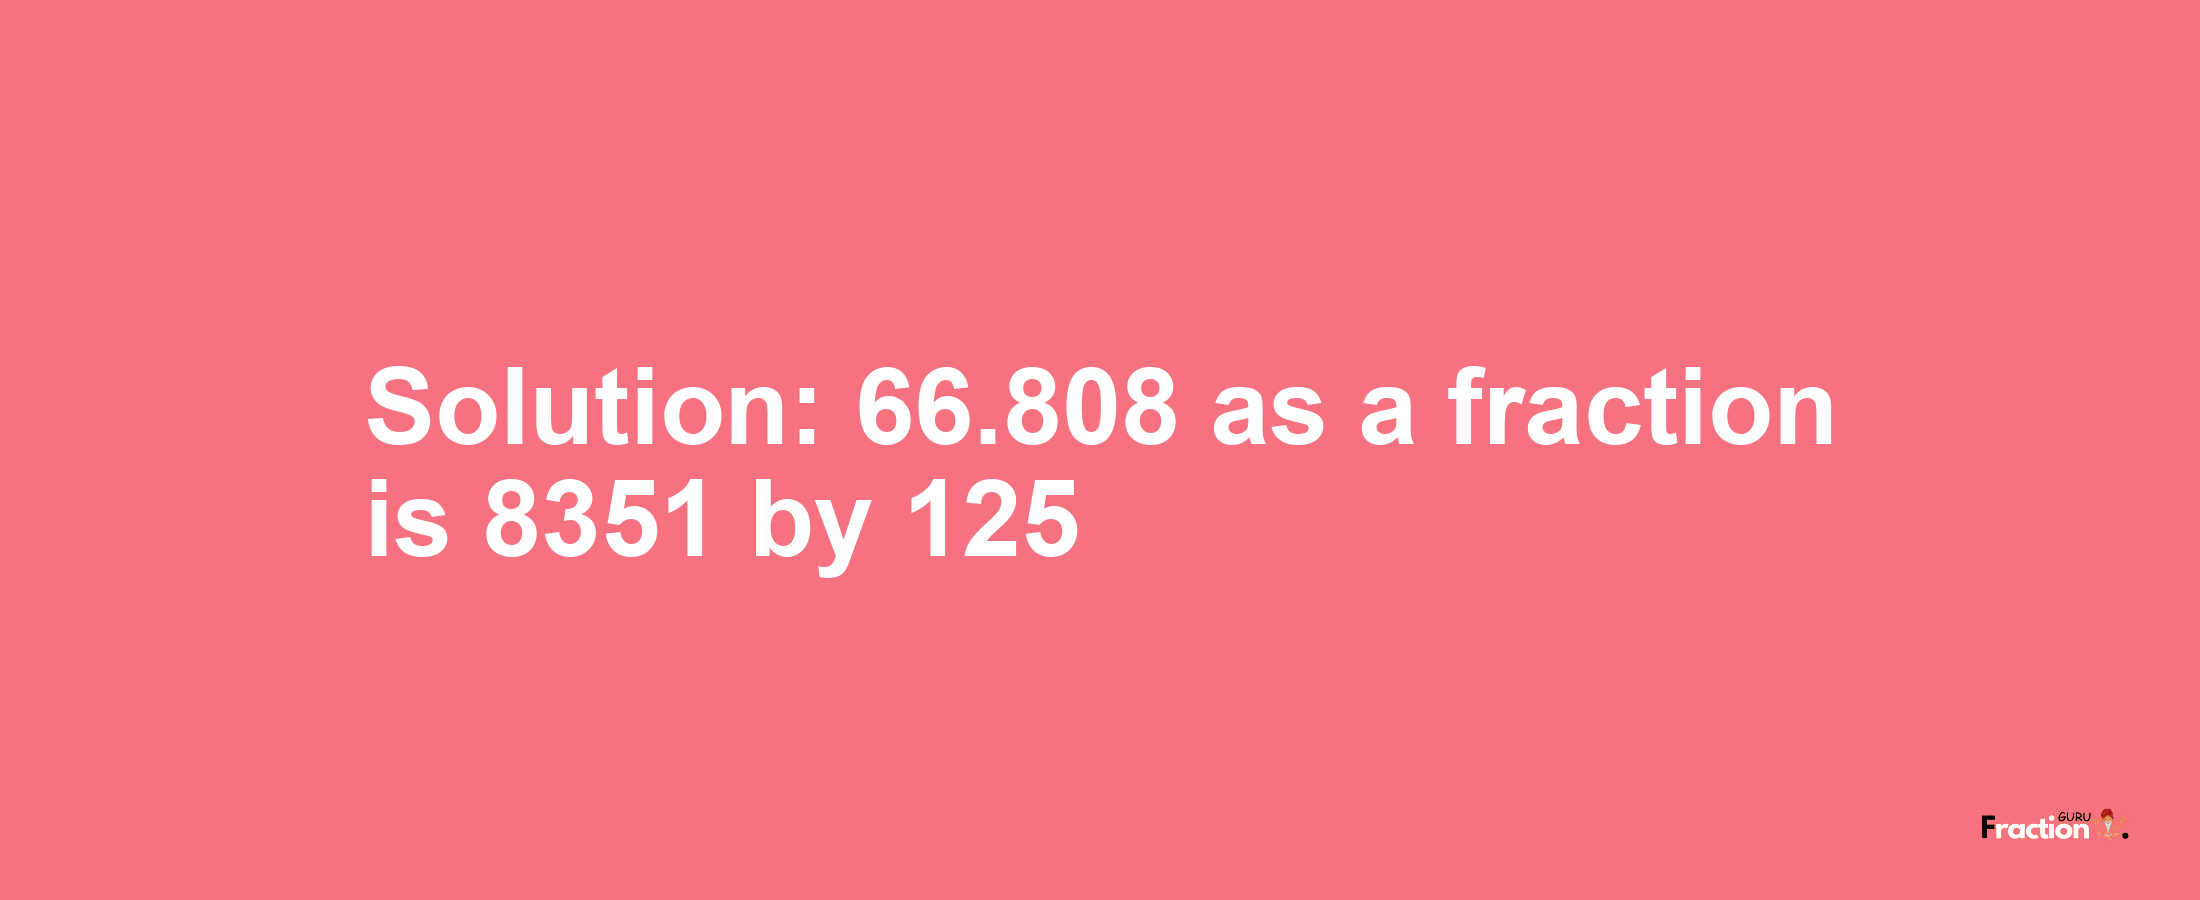 Solution:66.808 as a fraction is 8351/125